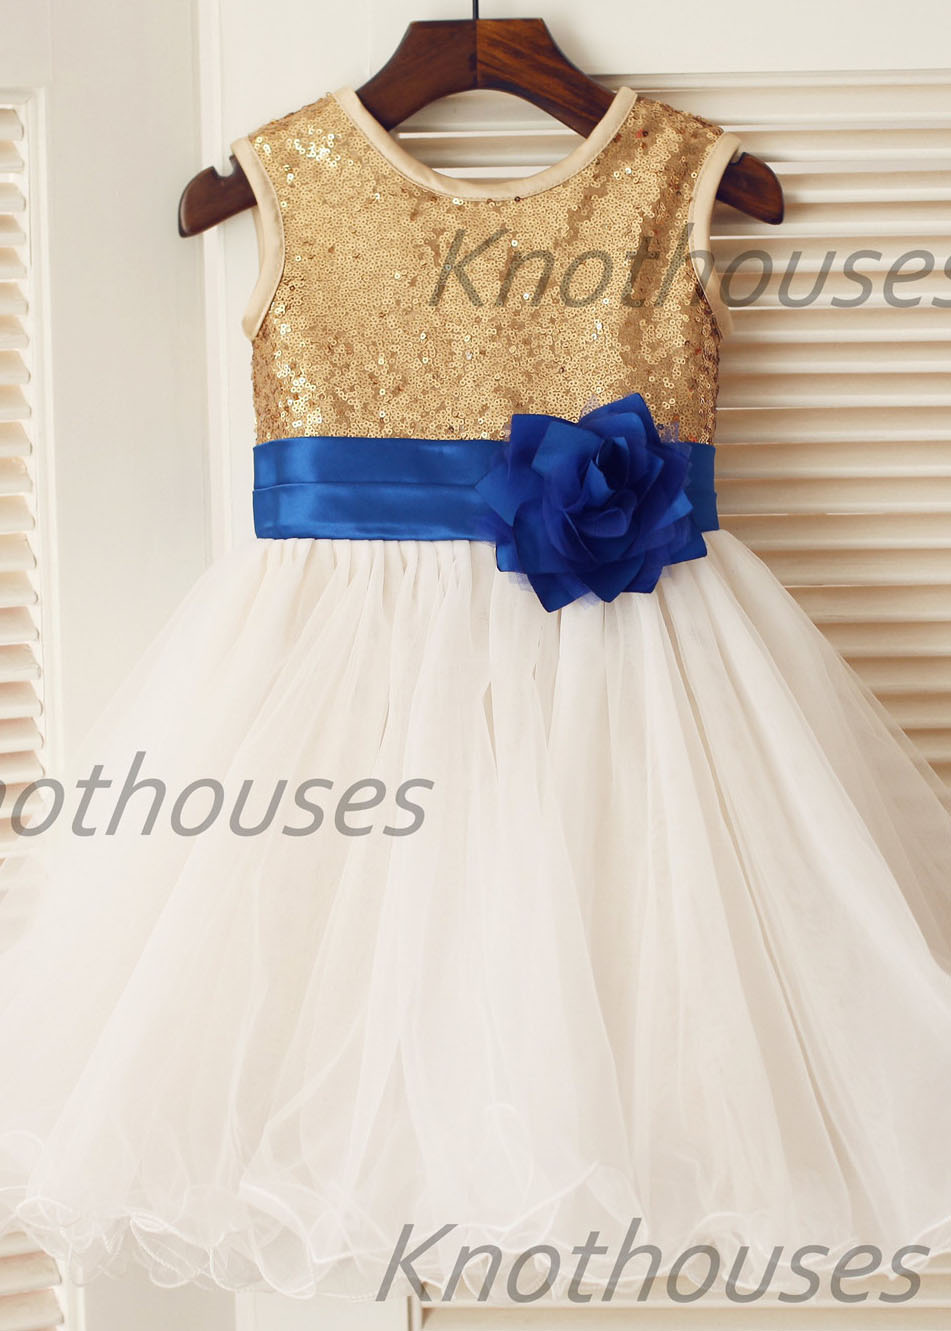 royal blue and gold gown